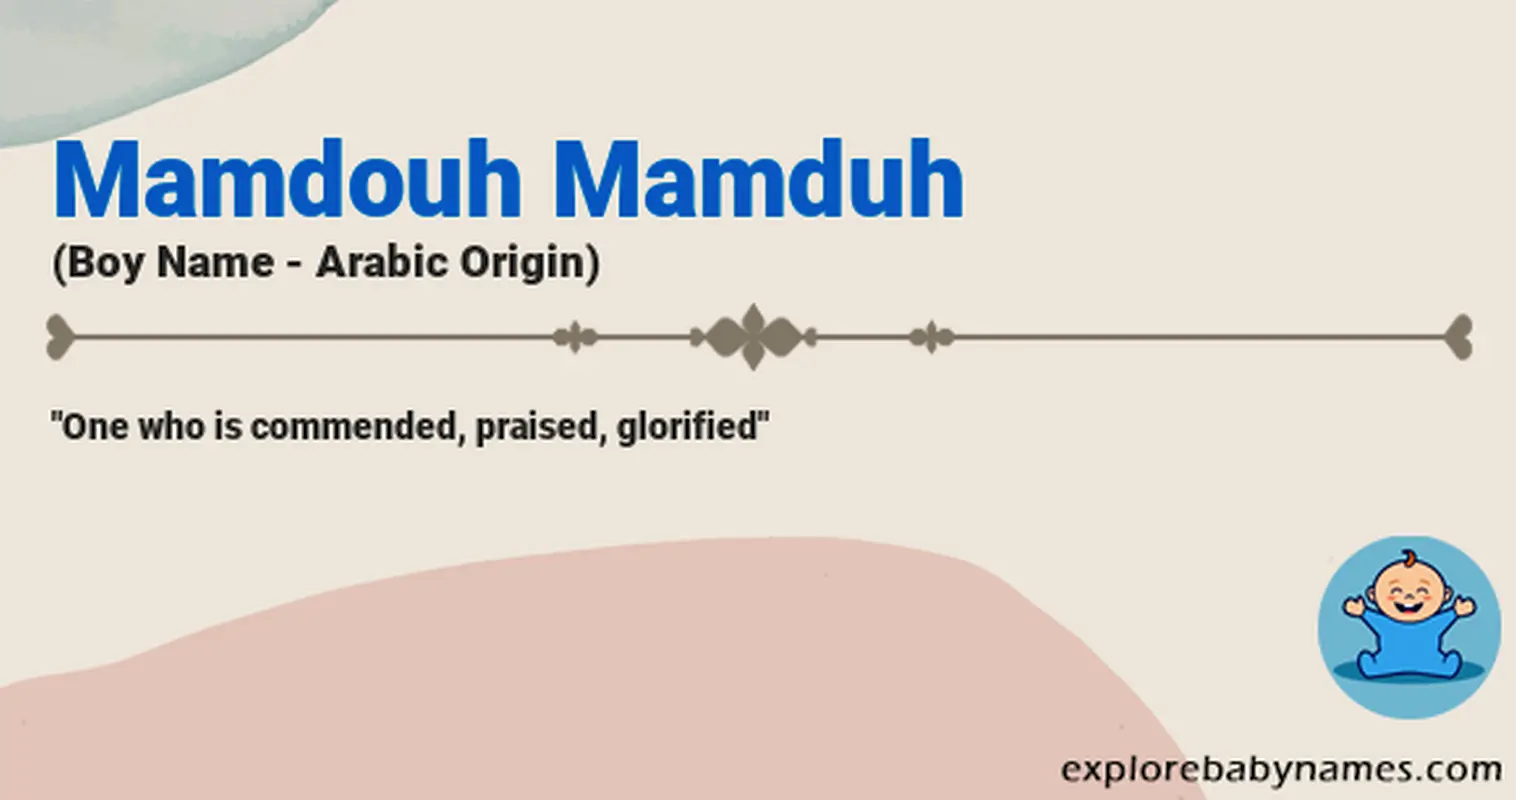 Meaning of Mamdouh Mamduh